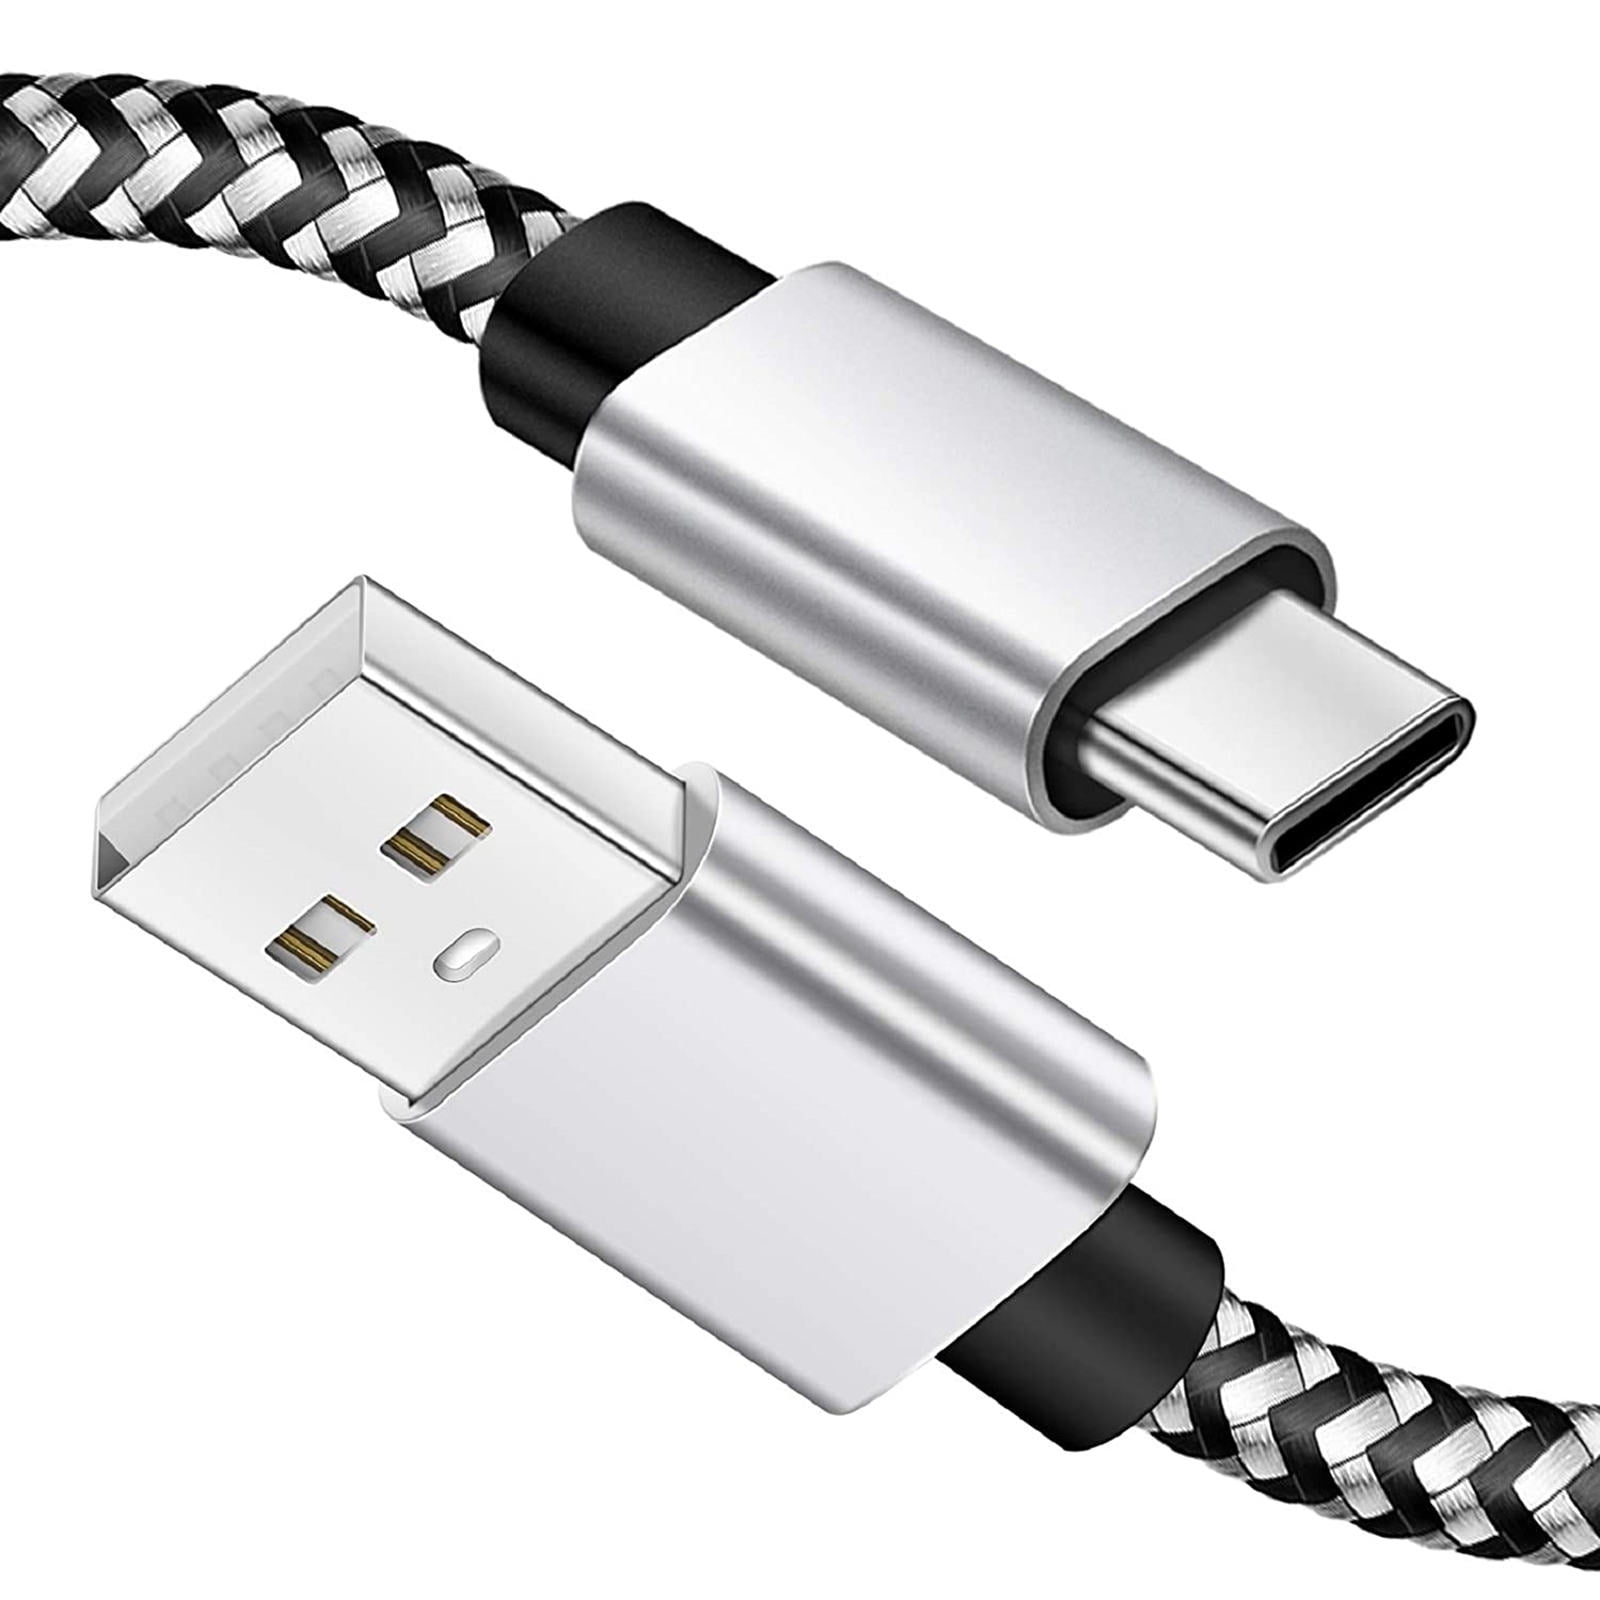 2 Pack USB Type C Cable Samsung Galaxy S10 S9 Note 9 8 S8 Plus DLC5223GC/37 USB-C to USB-C Gray Durable Braided Fast Charging Cable MacBook Pro Compatible with iPad Pro Philips 3 Ft